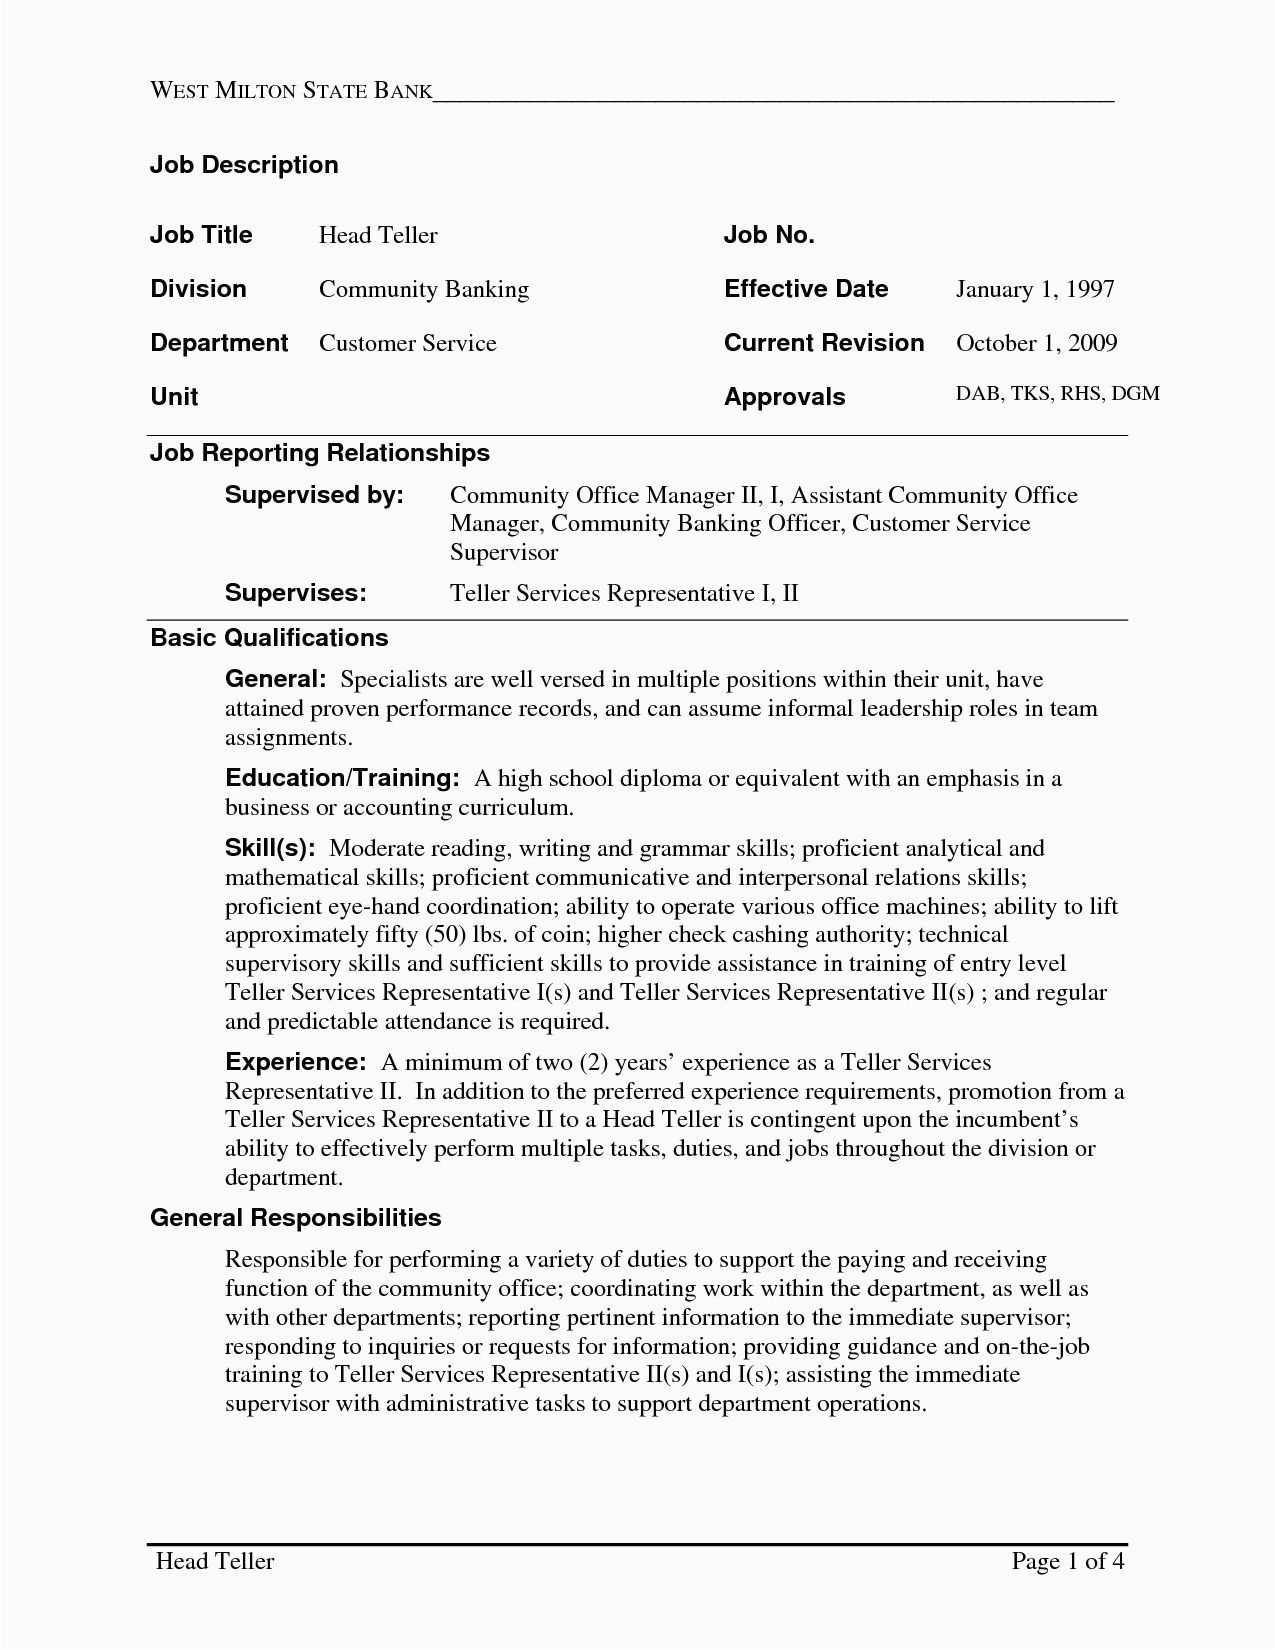 Sample Resume for Bank Jobs with No Experience Pdf Pin by Calendar 2019 2020 On Latest Resume